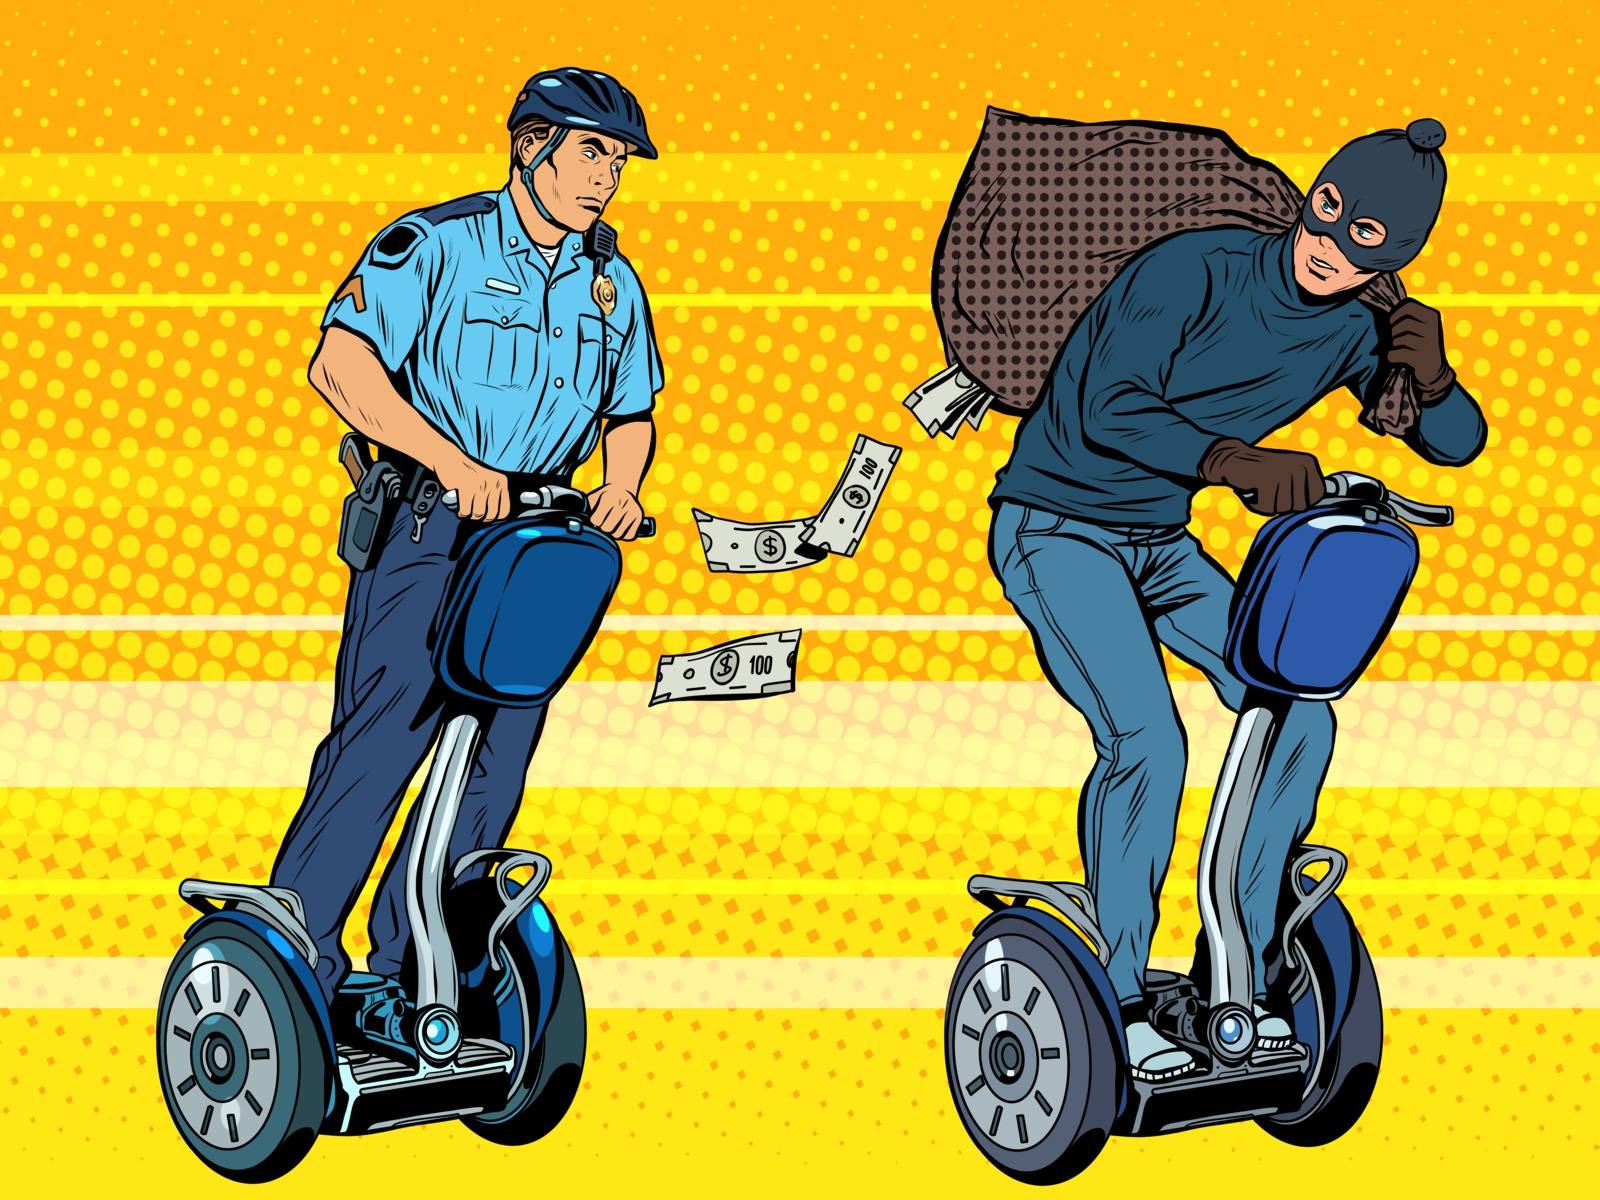 Thief flees with money from the police pop art retro style. The chase on the scooter. Crime law and order